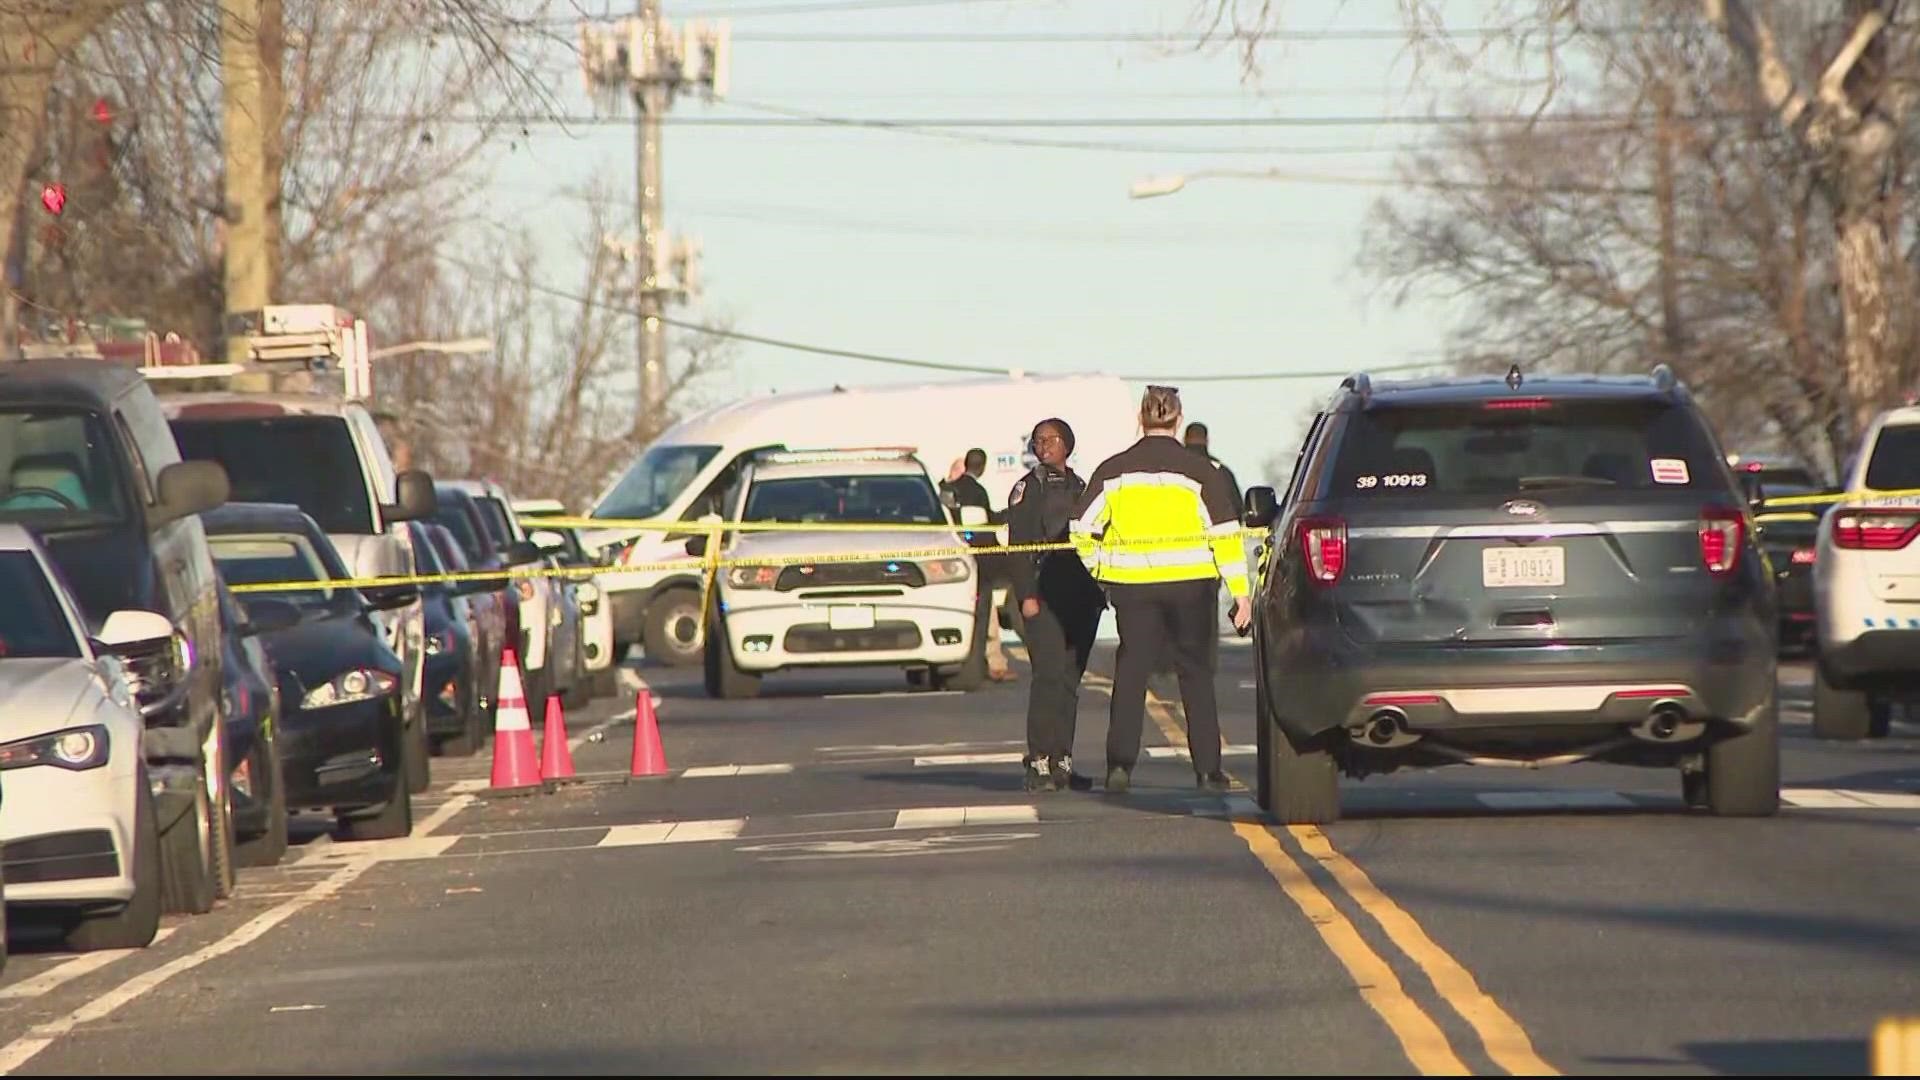 DC Police officers are investigating two separate homicide cases that left four people dead within hours.